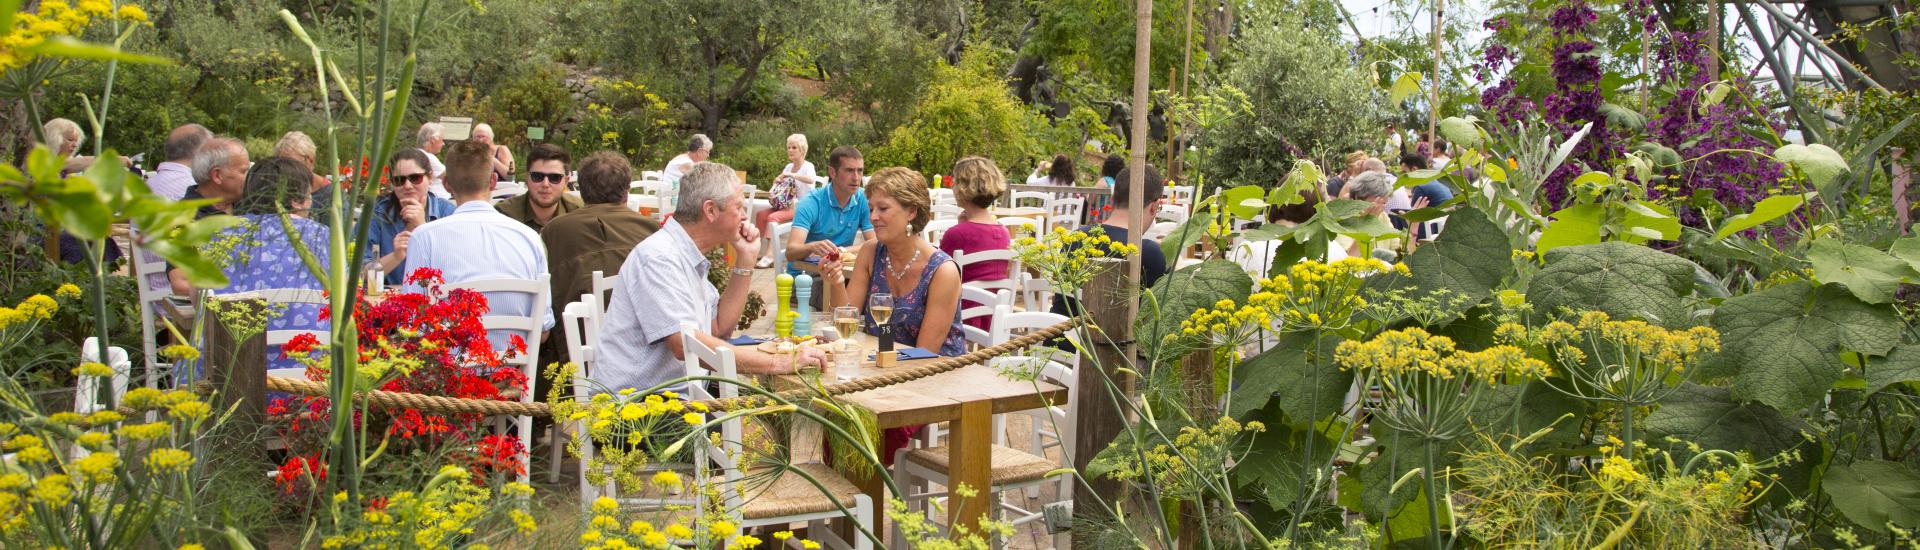 People dining in the Eden Project's Mediterranean Biome